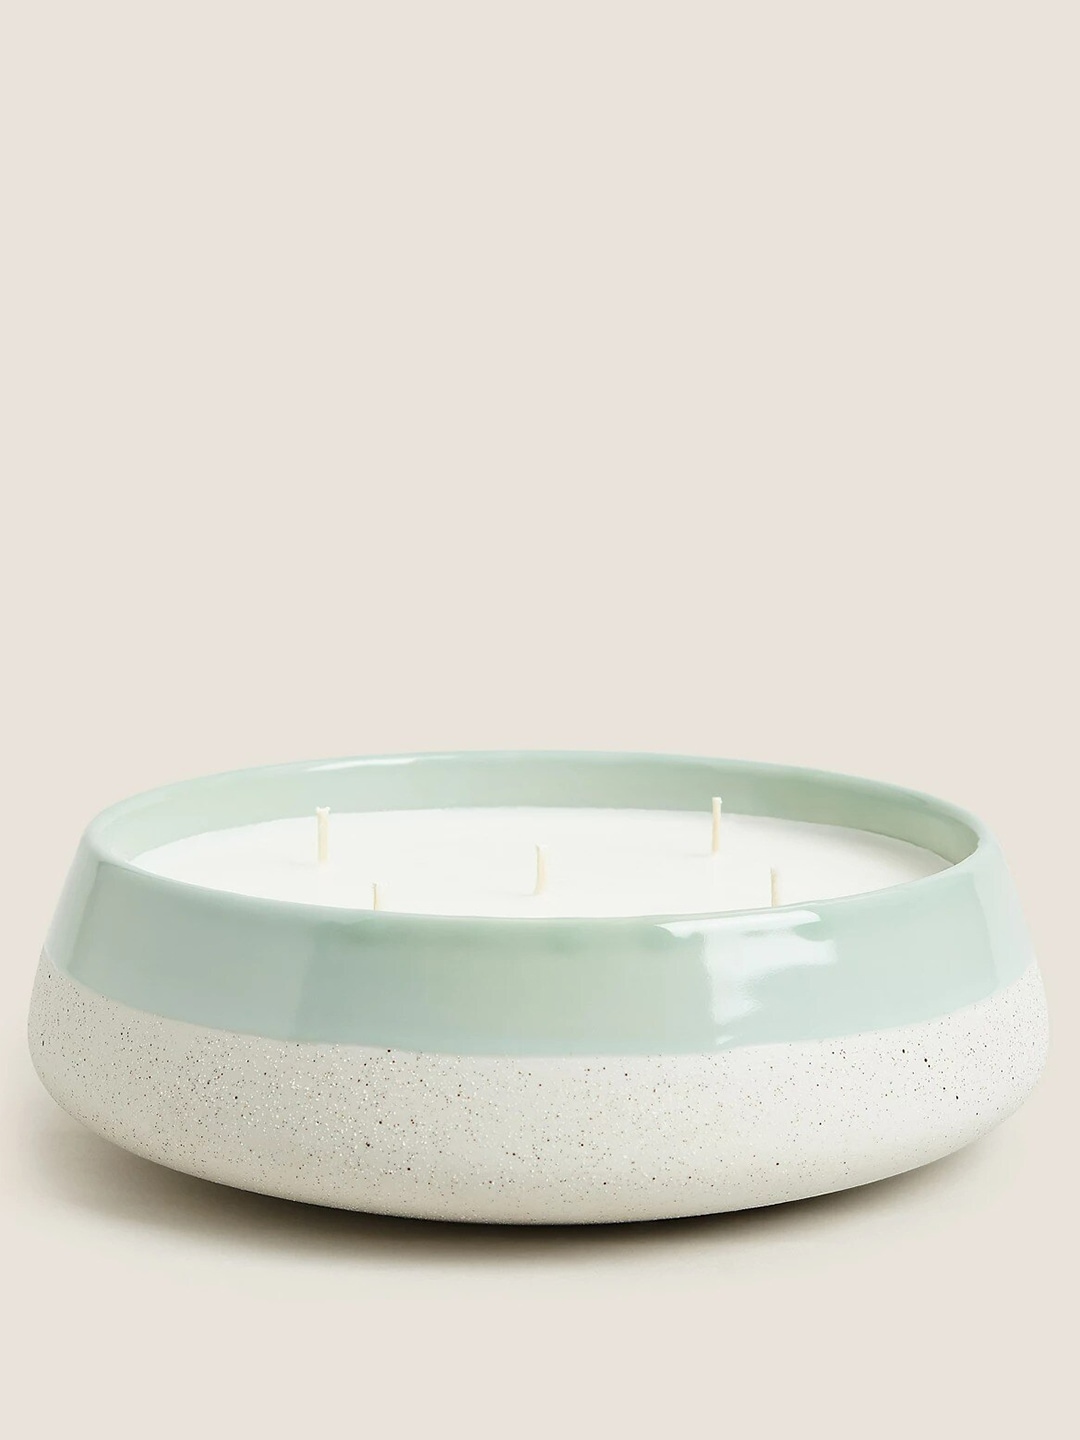 Marks & Spencer White & Green Printed Wax Candle Price in India